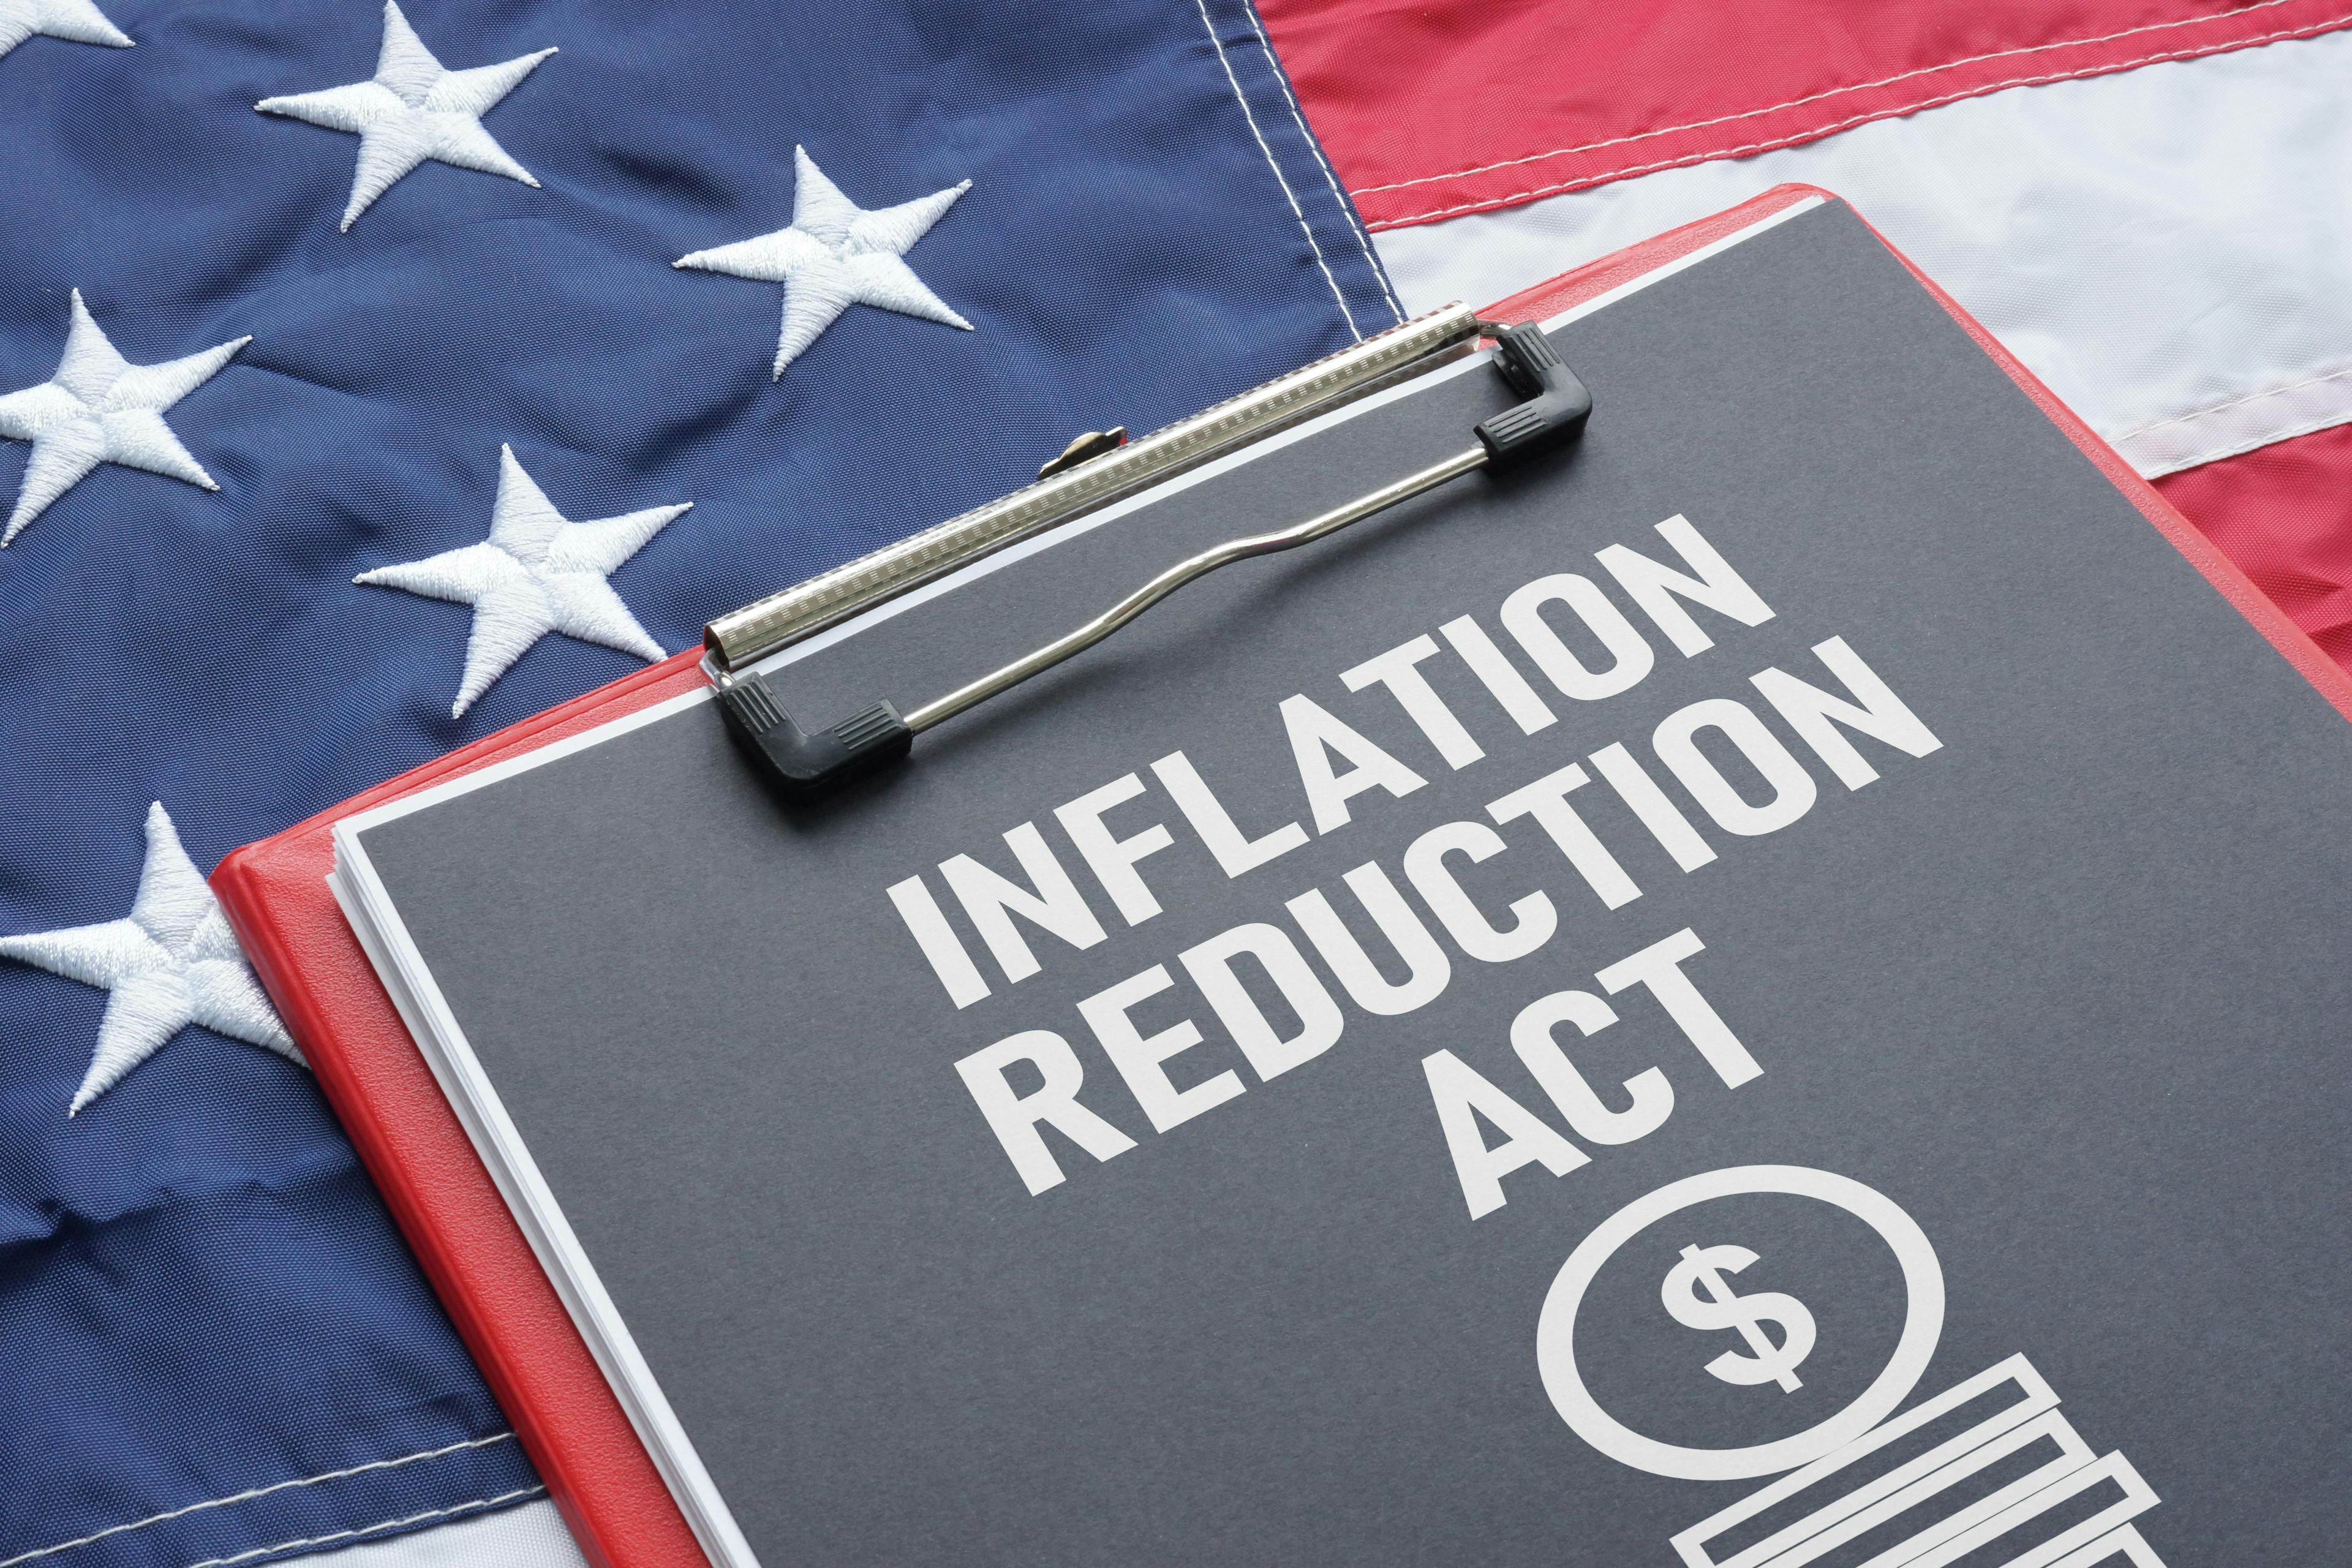 How the Inflation Reduction Act May Affect Biosimilars